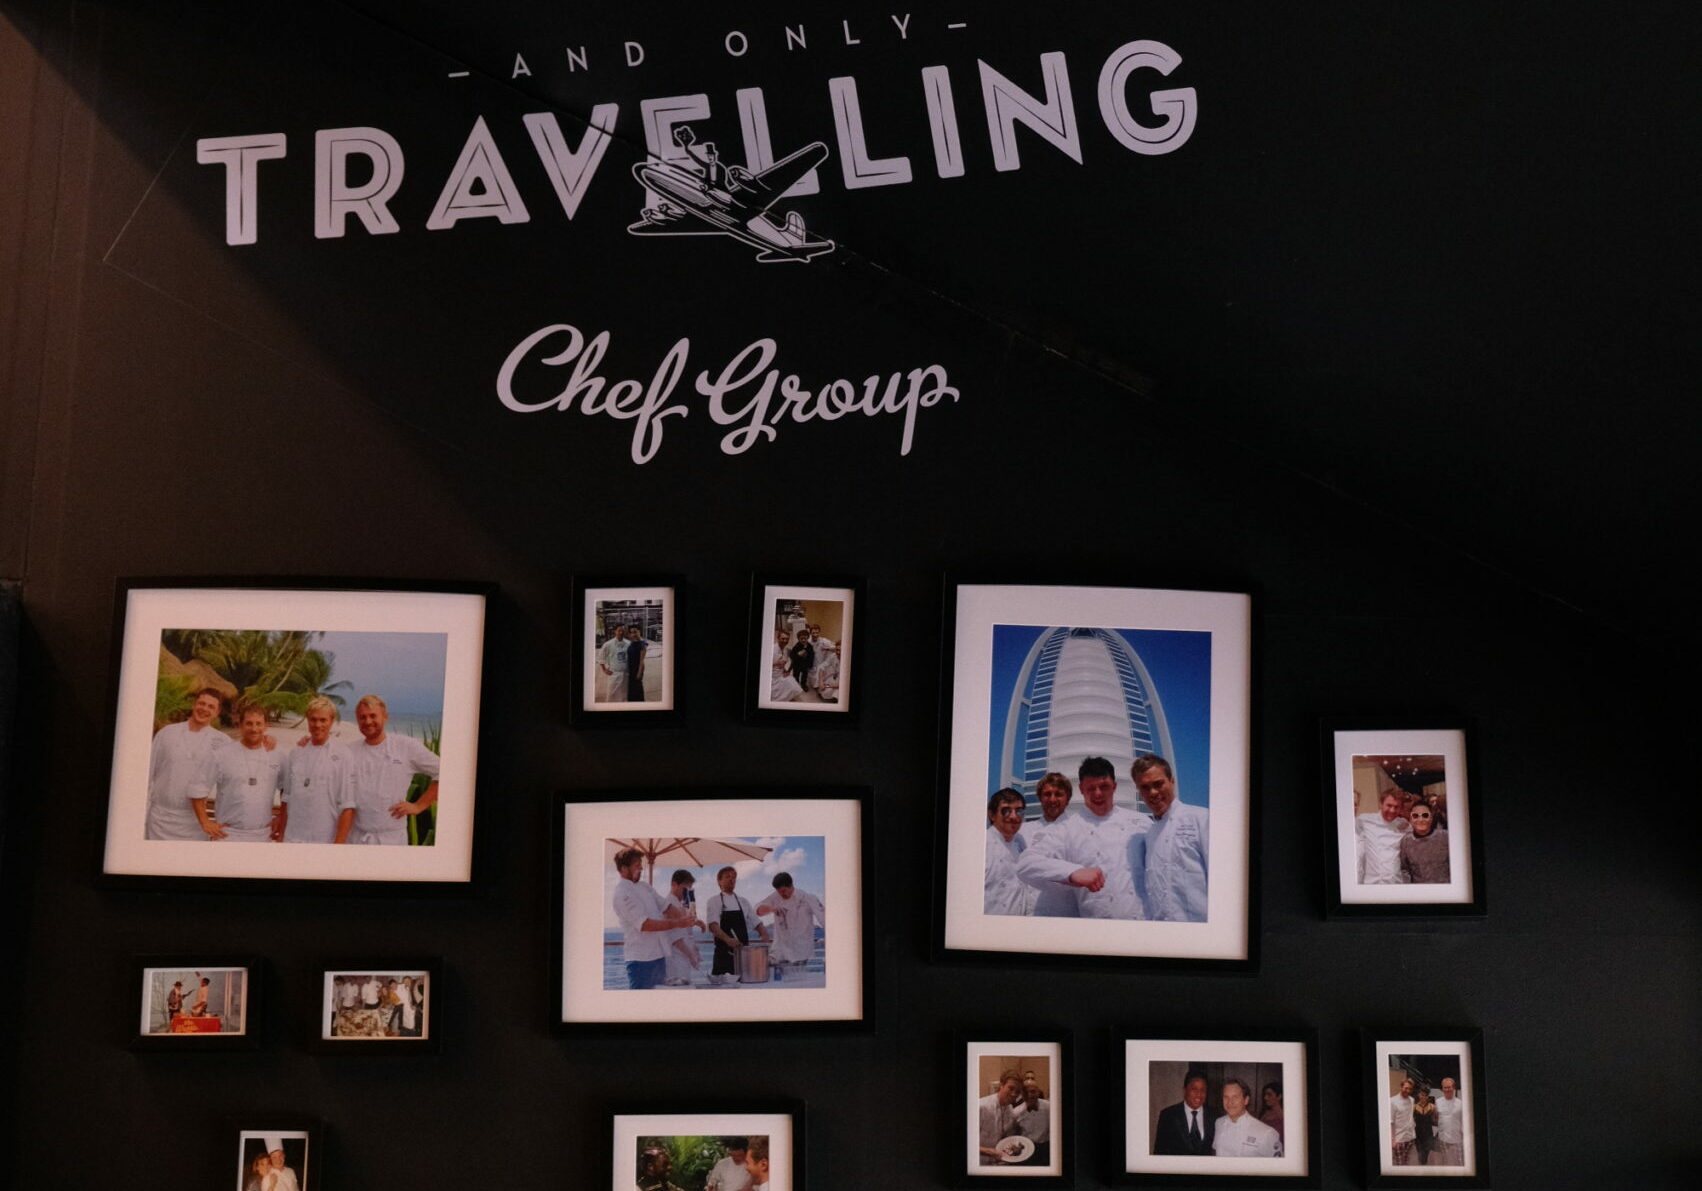 flying-culinary-circus-worlds-first-travelling-chef-group-vegg-lokale